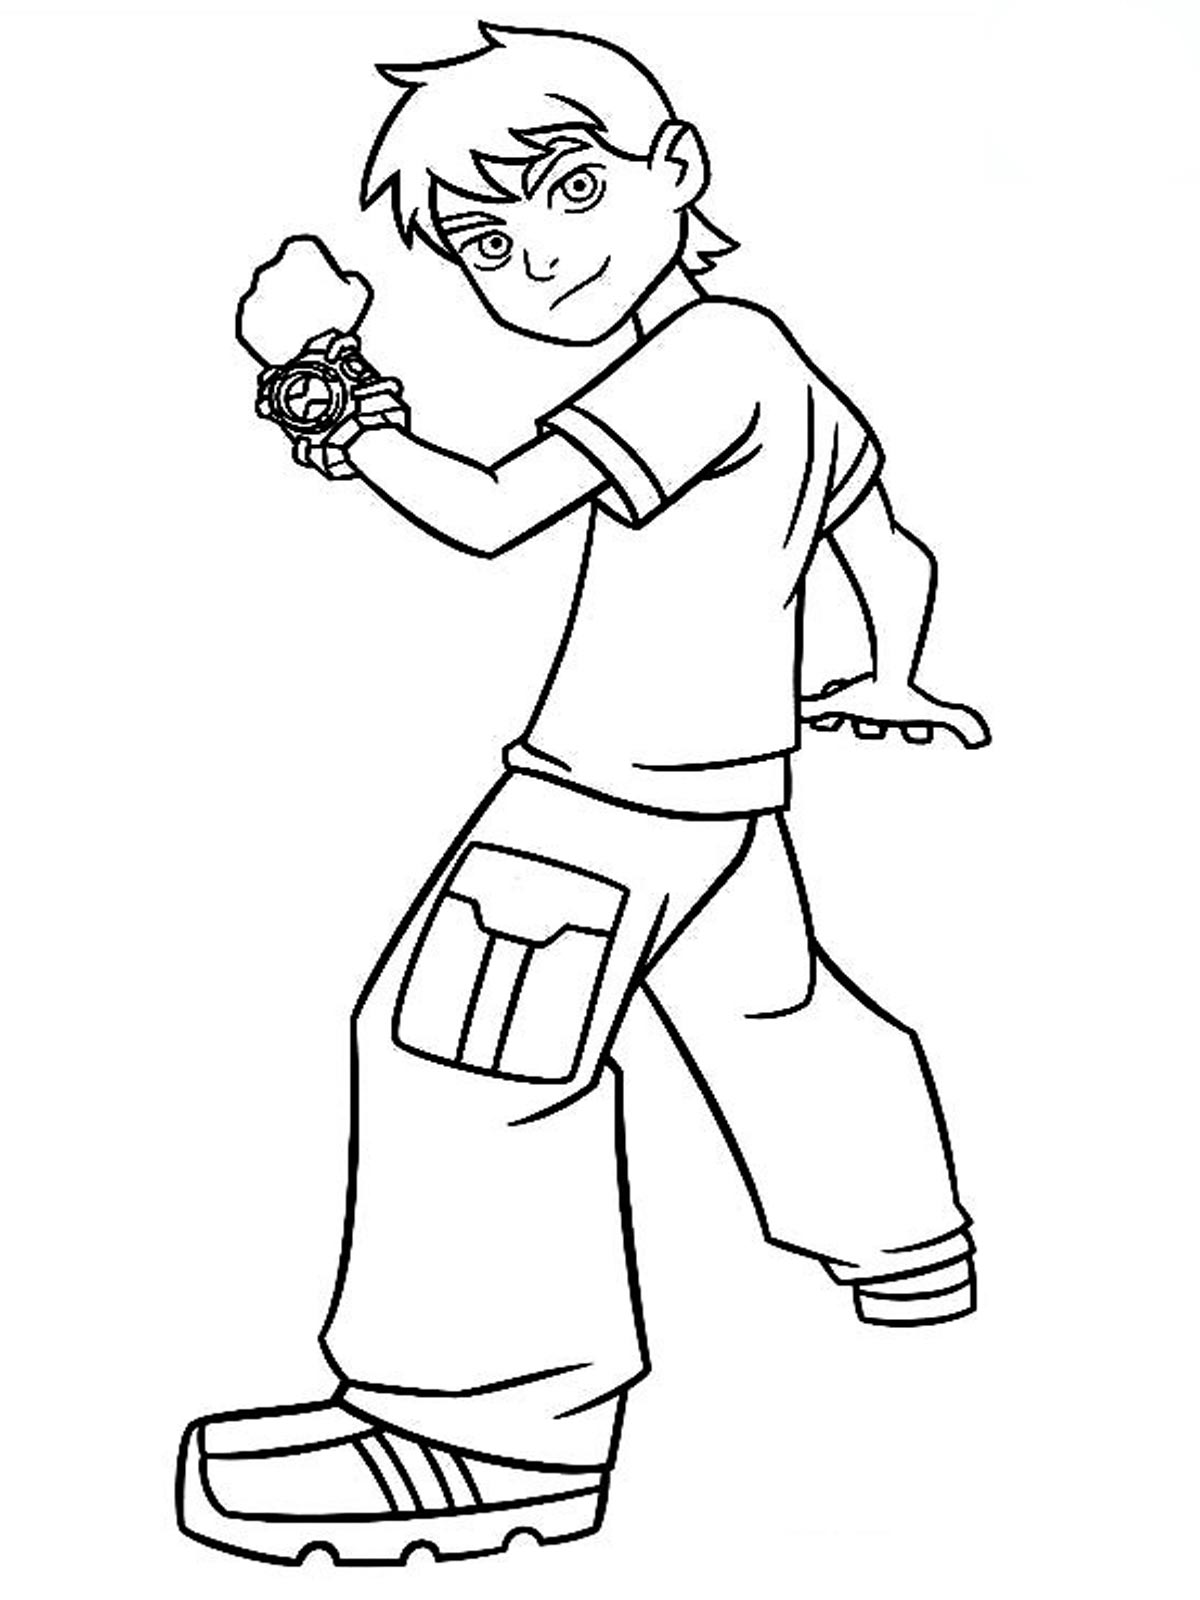 Ben 10 Coloring Pages | Realistic Coloring Pages